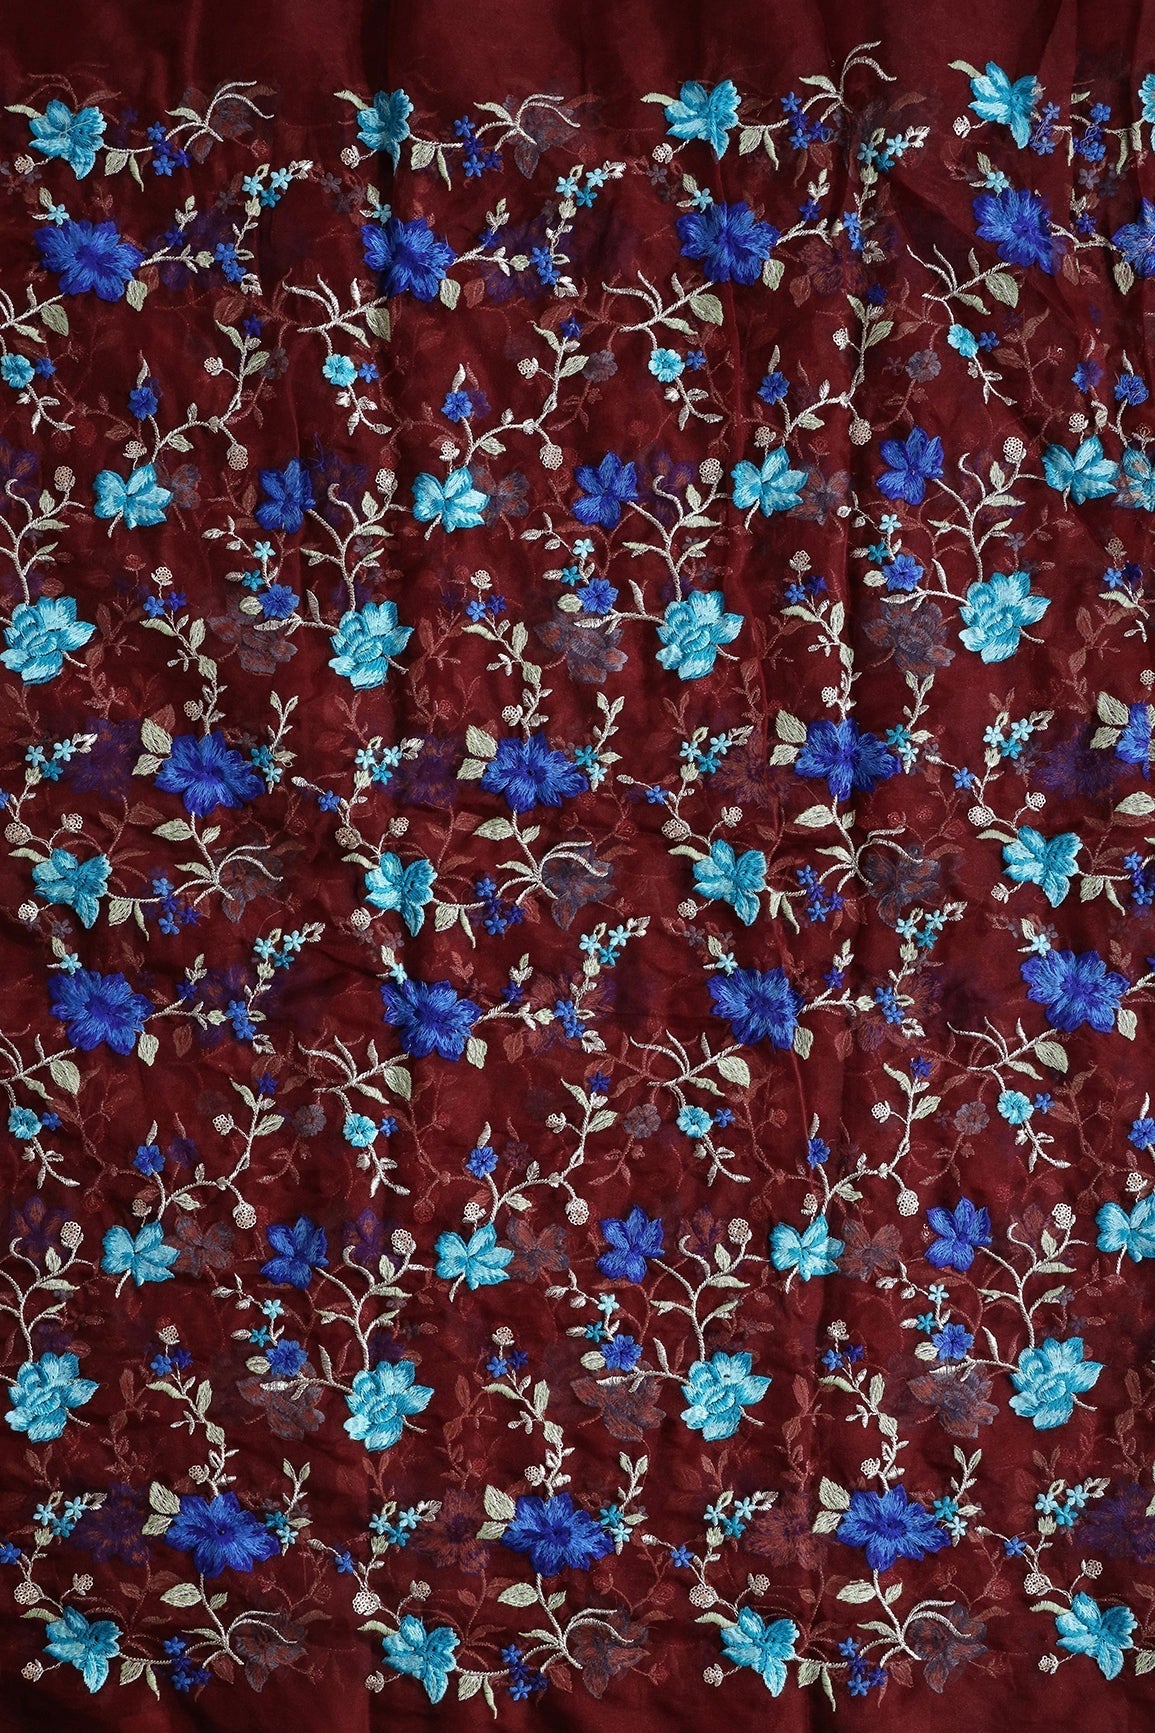 Royal Blue And Teal Thread With Gold Zari Floral Embroidery On Maroon Organza Fabric - doeraa